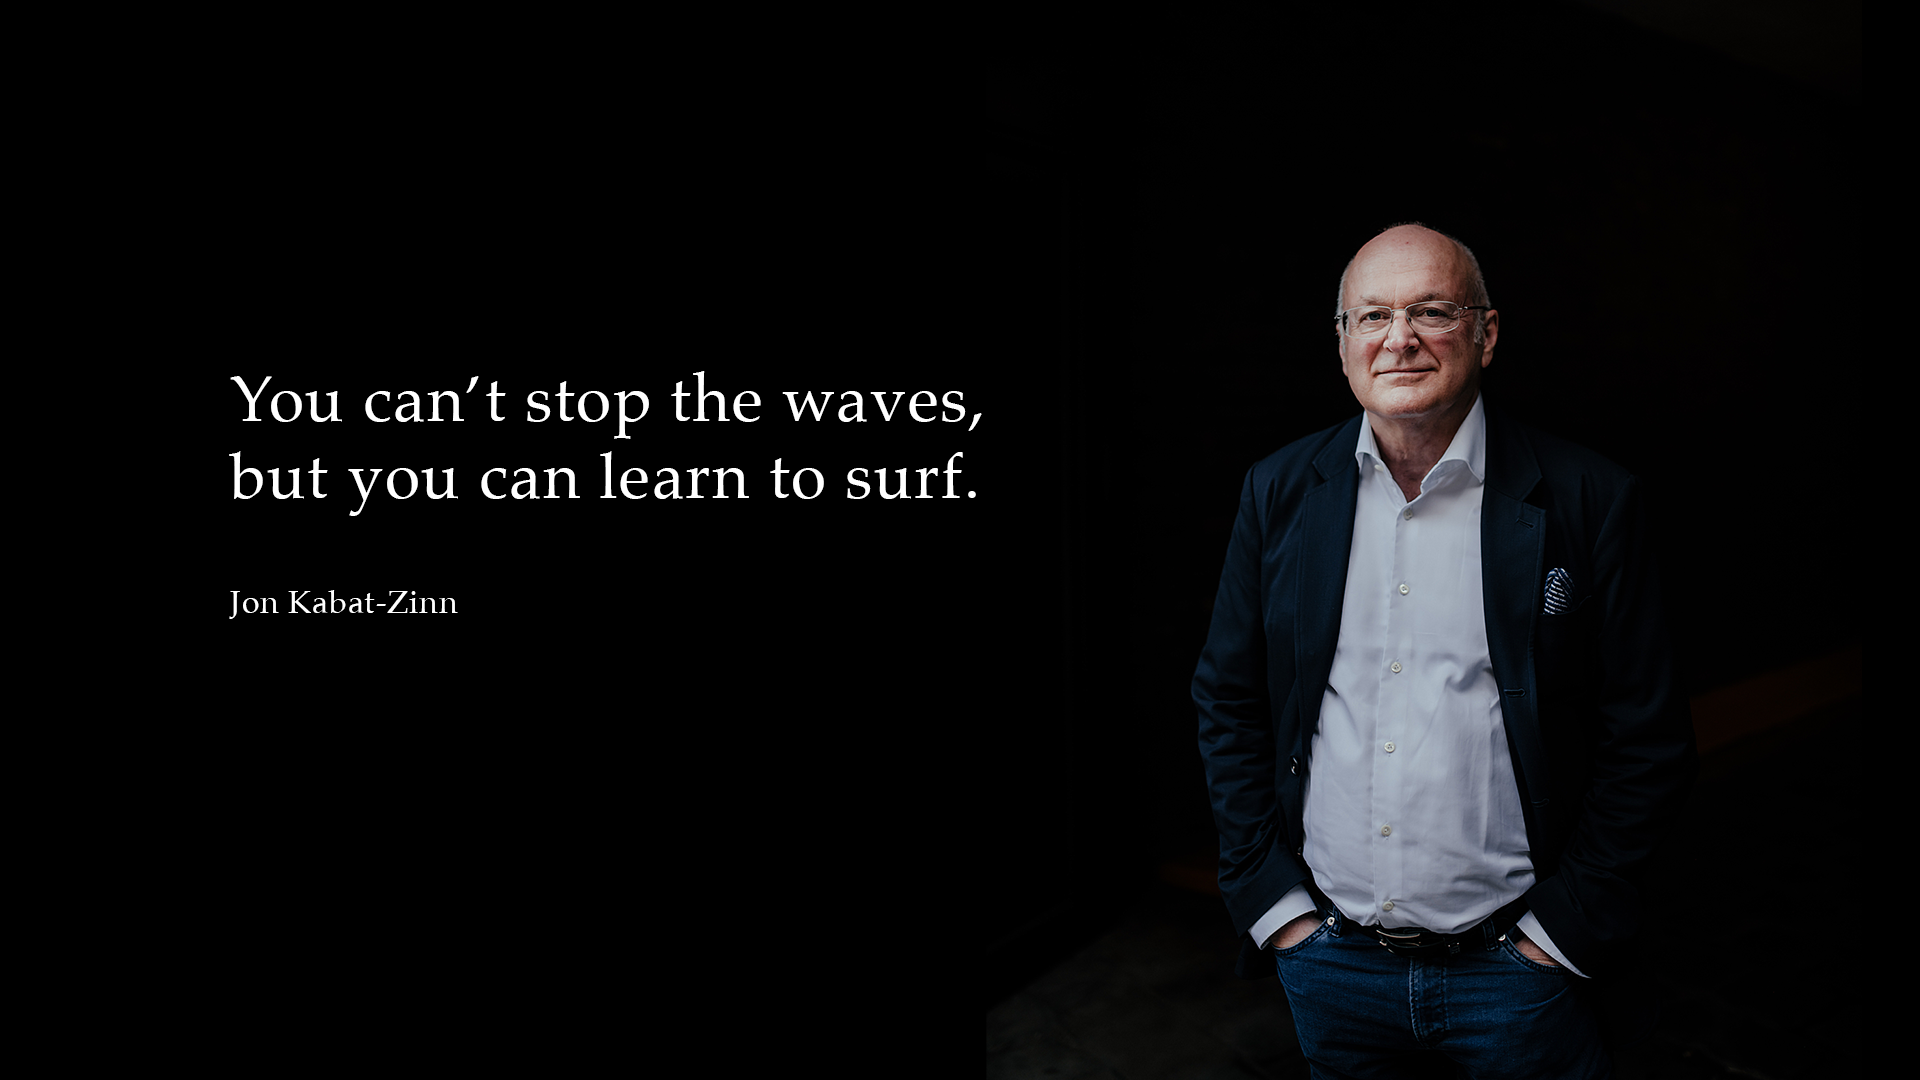 You can't stop the waves<br>from coming, but you can<br>learn to surf